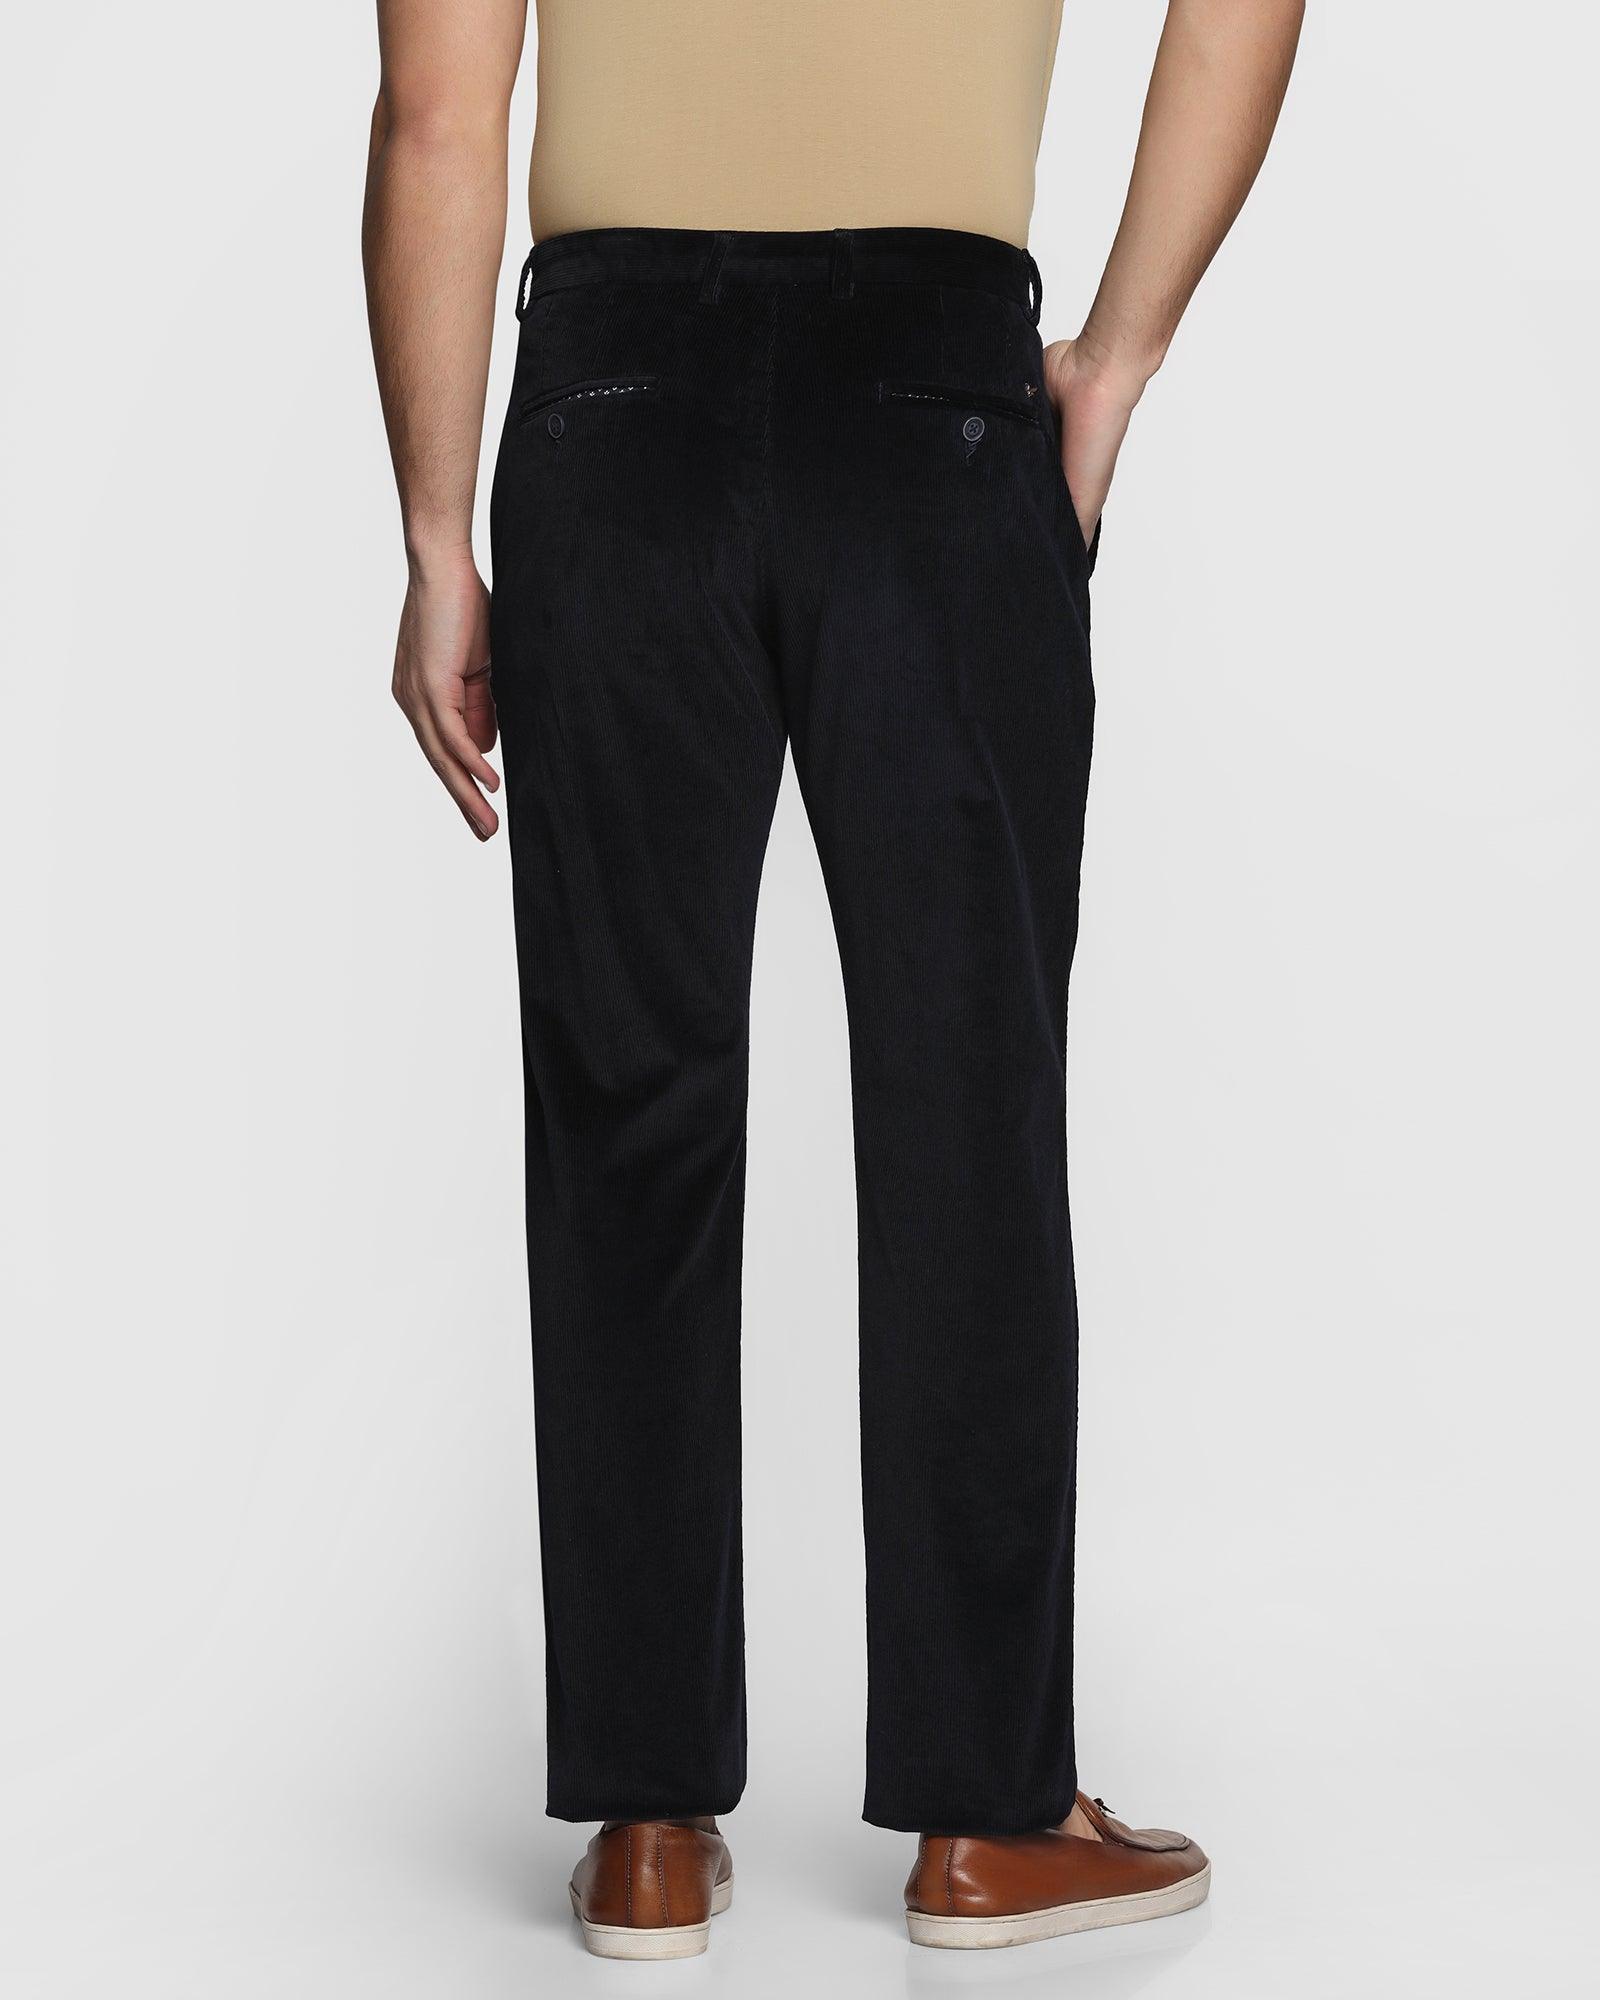 Black Machine Trousers by Factor's on Sale